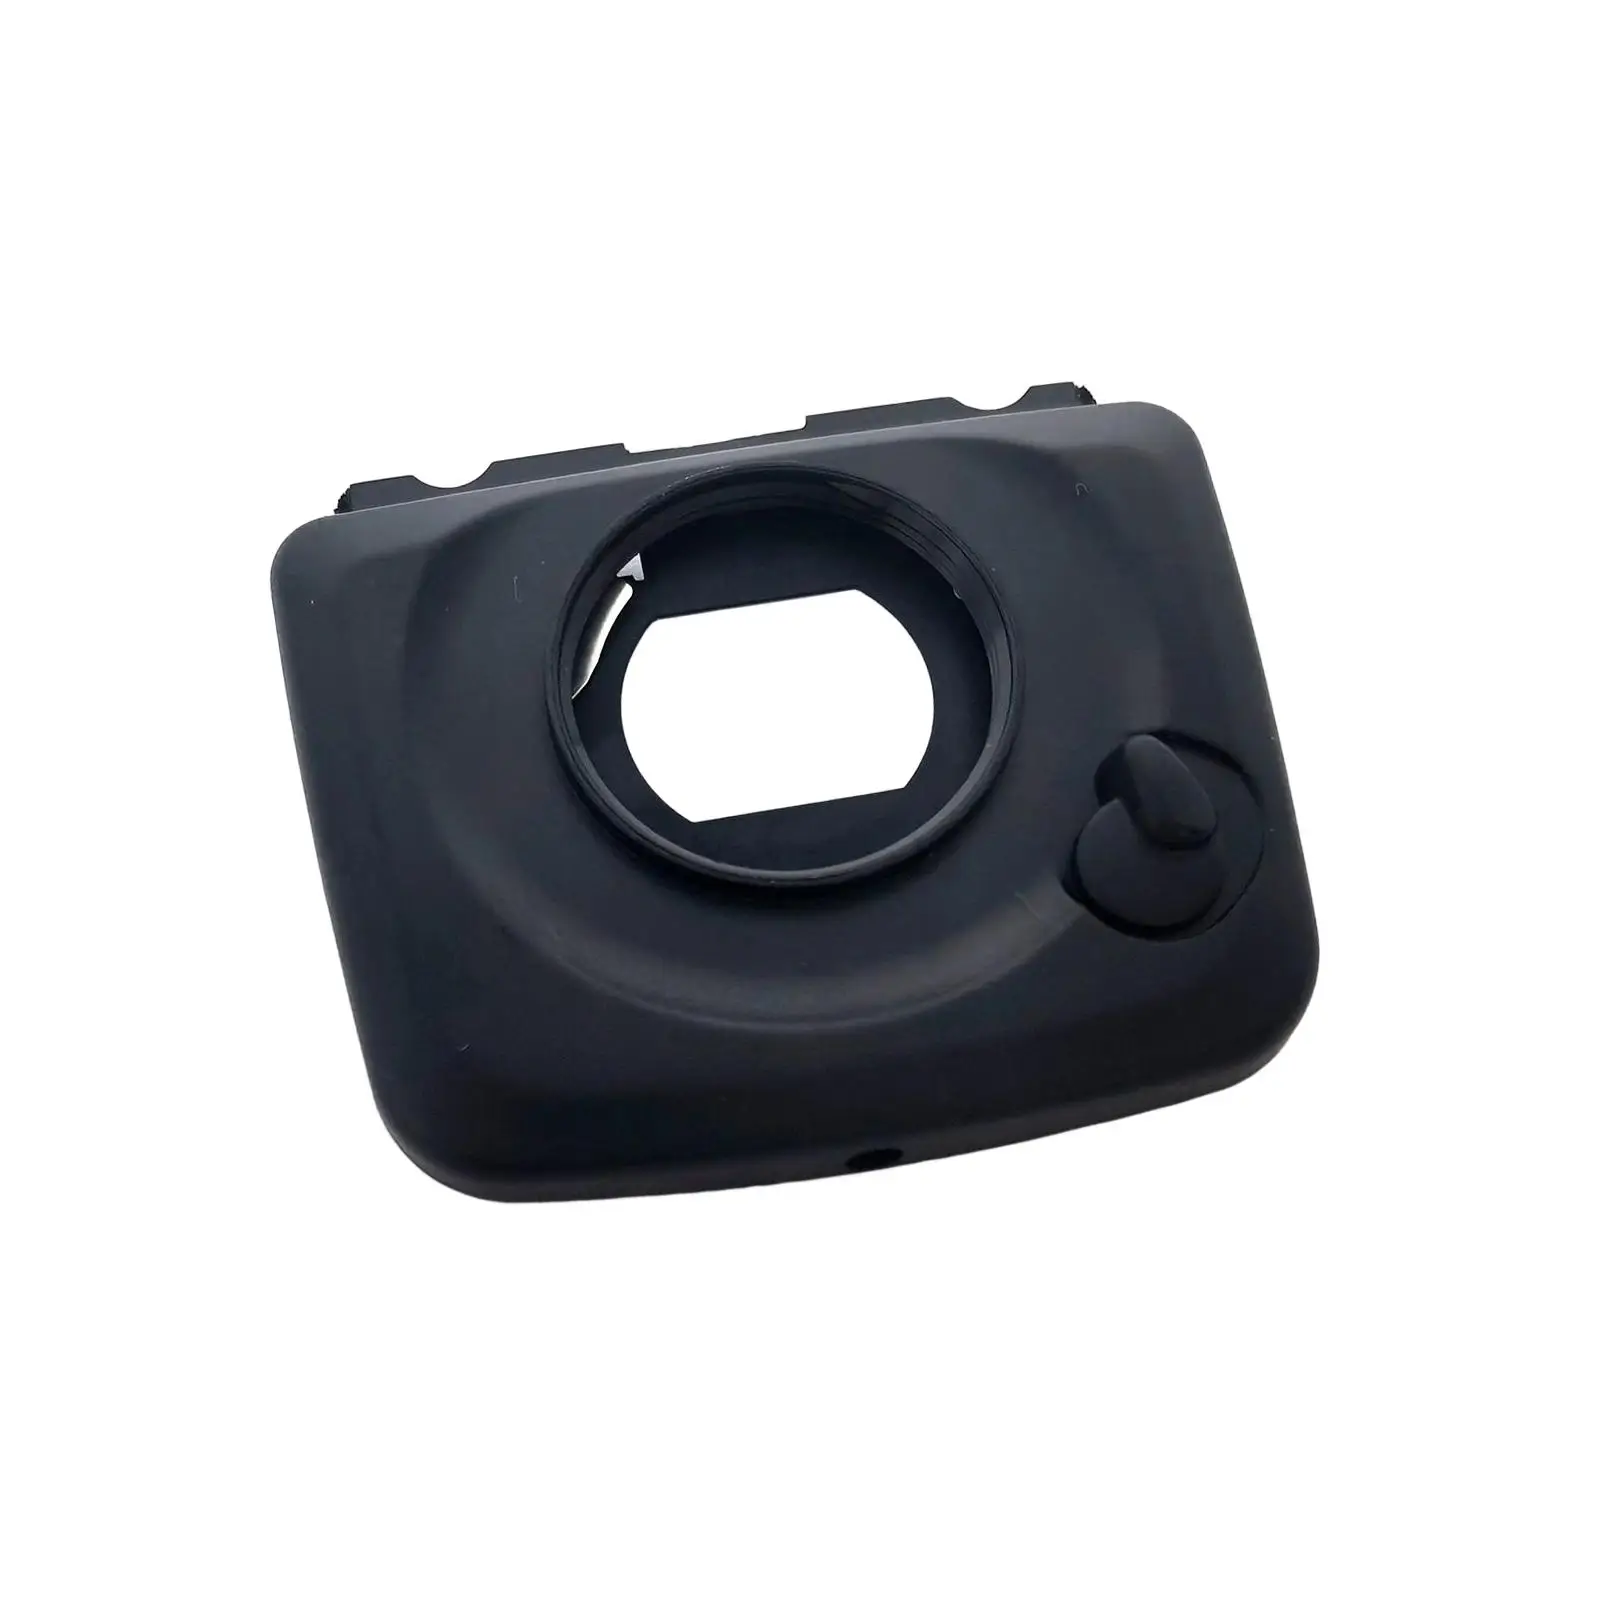 Camera Viewfinder Eyecup Black High Strength Eyepice for D810 Digital Camera Replacement